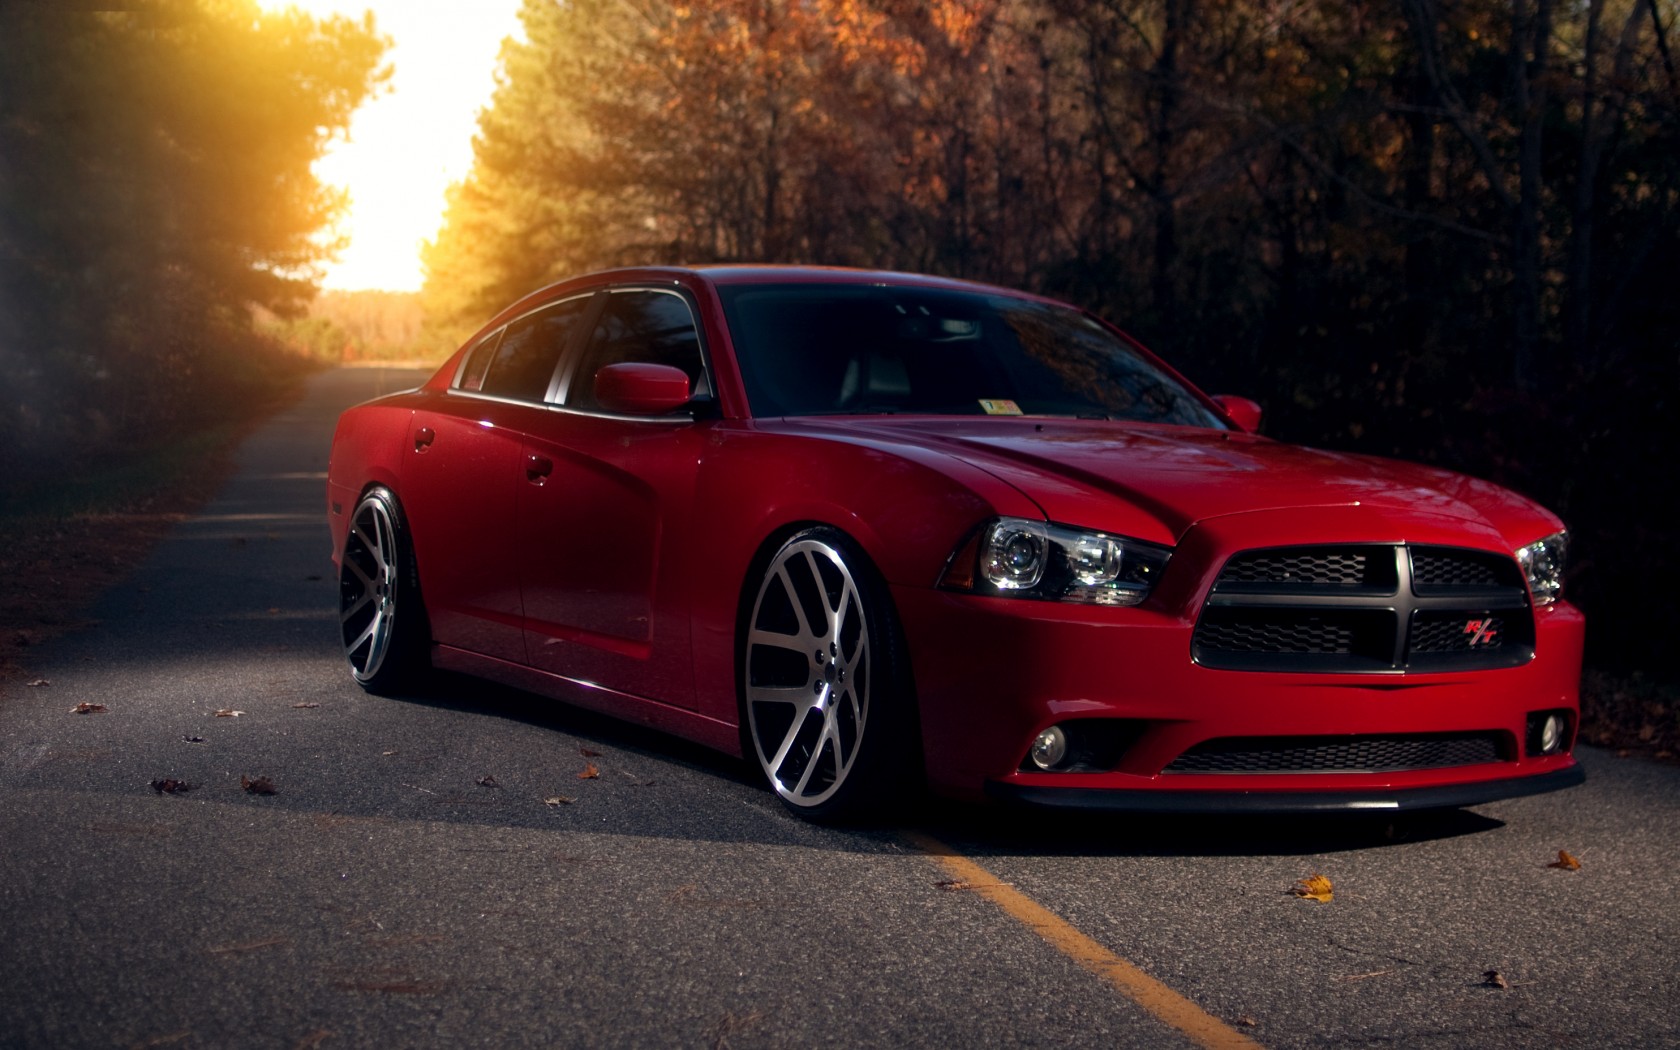 vehicles, dodge charger r/t, dodge phone wallpaper